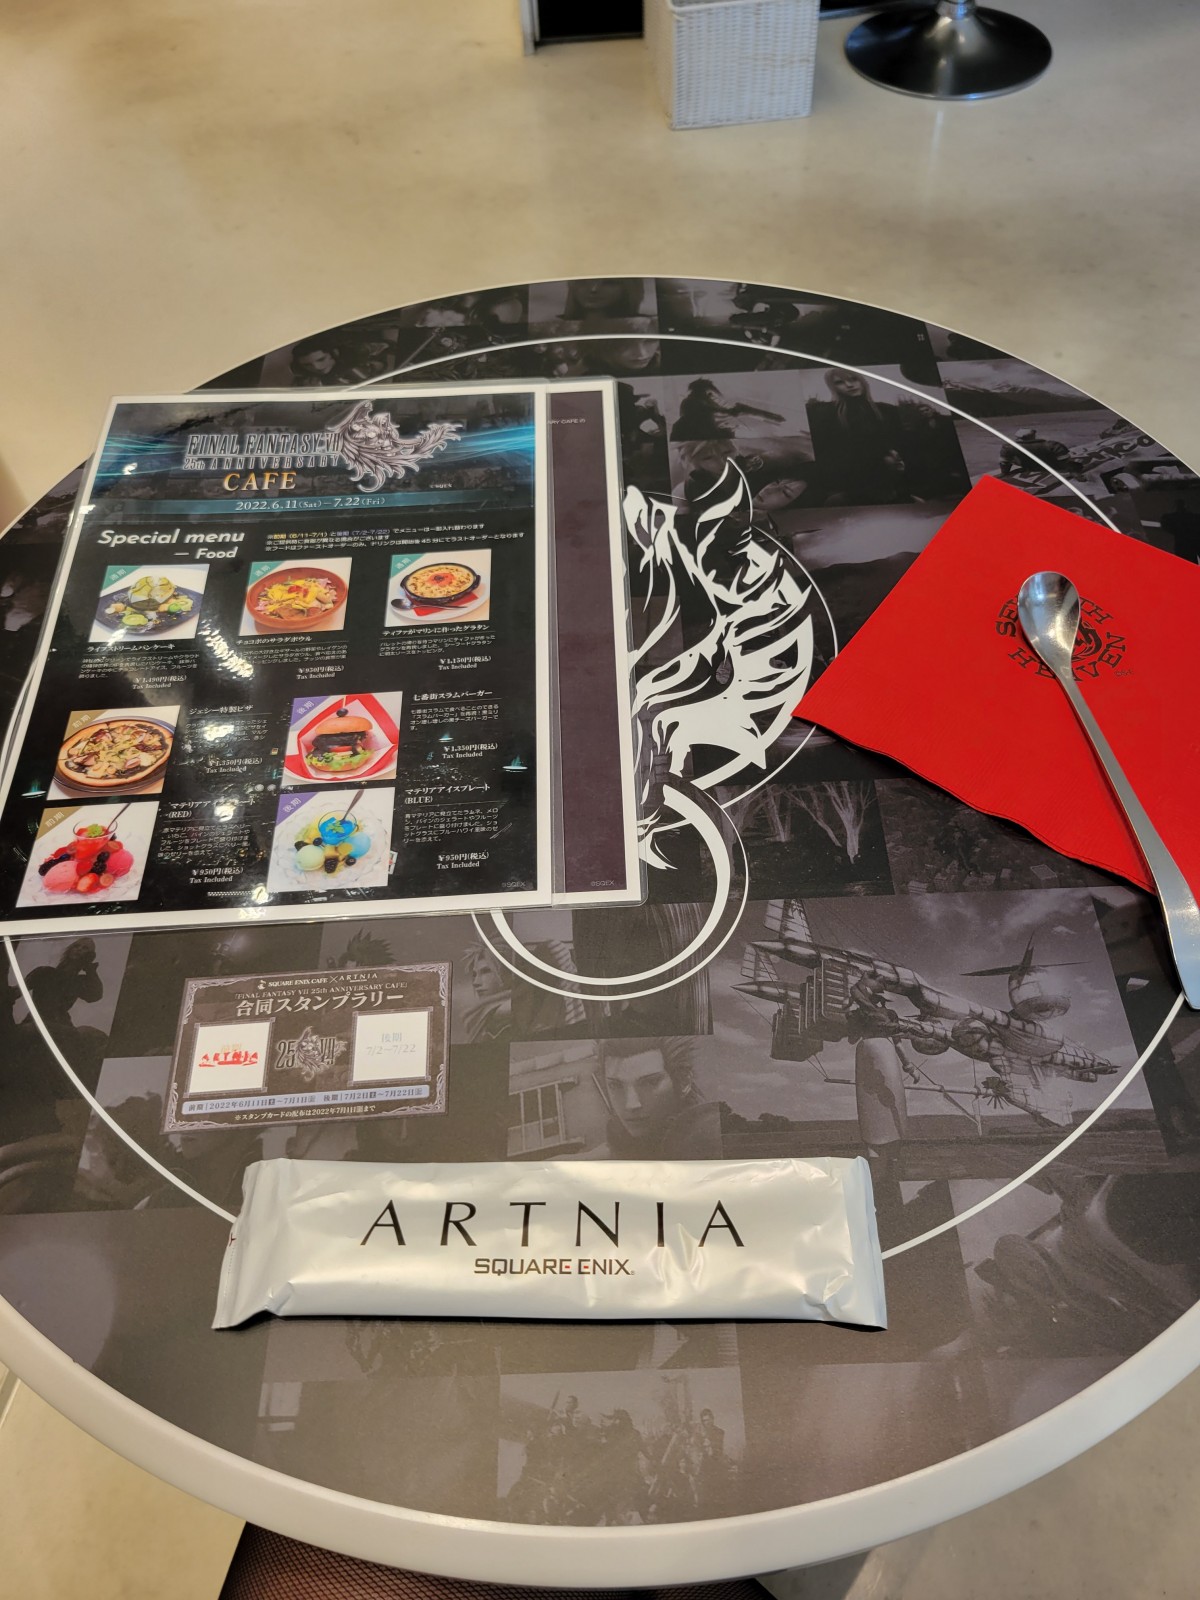 A Must-See Shop for Gamers! ARTNIA by SQUARE ENIX